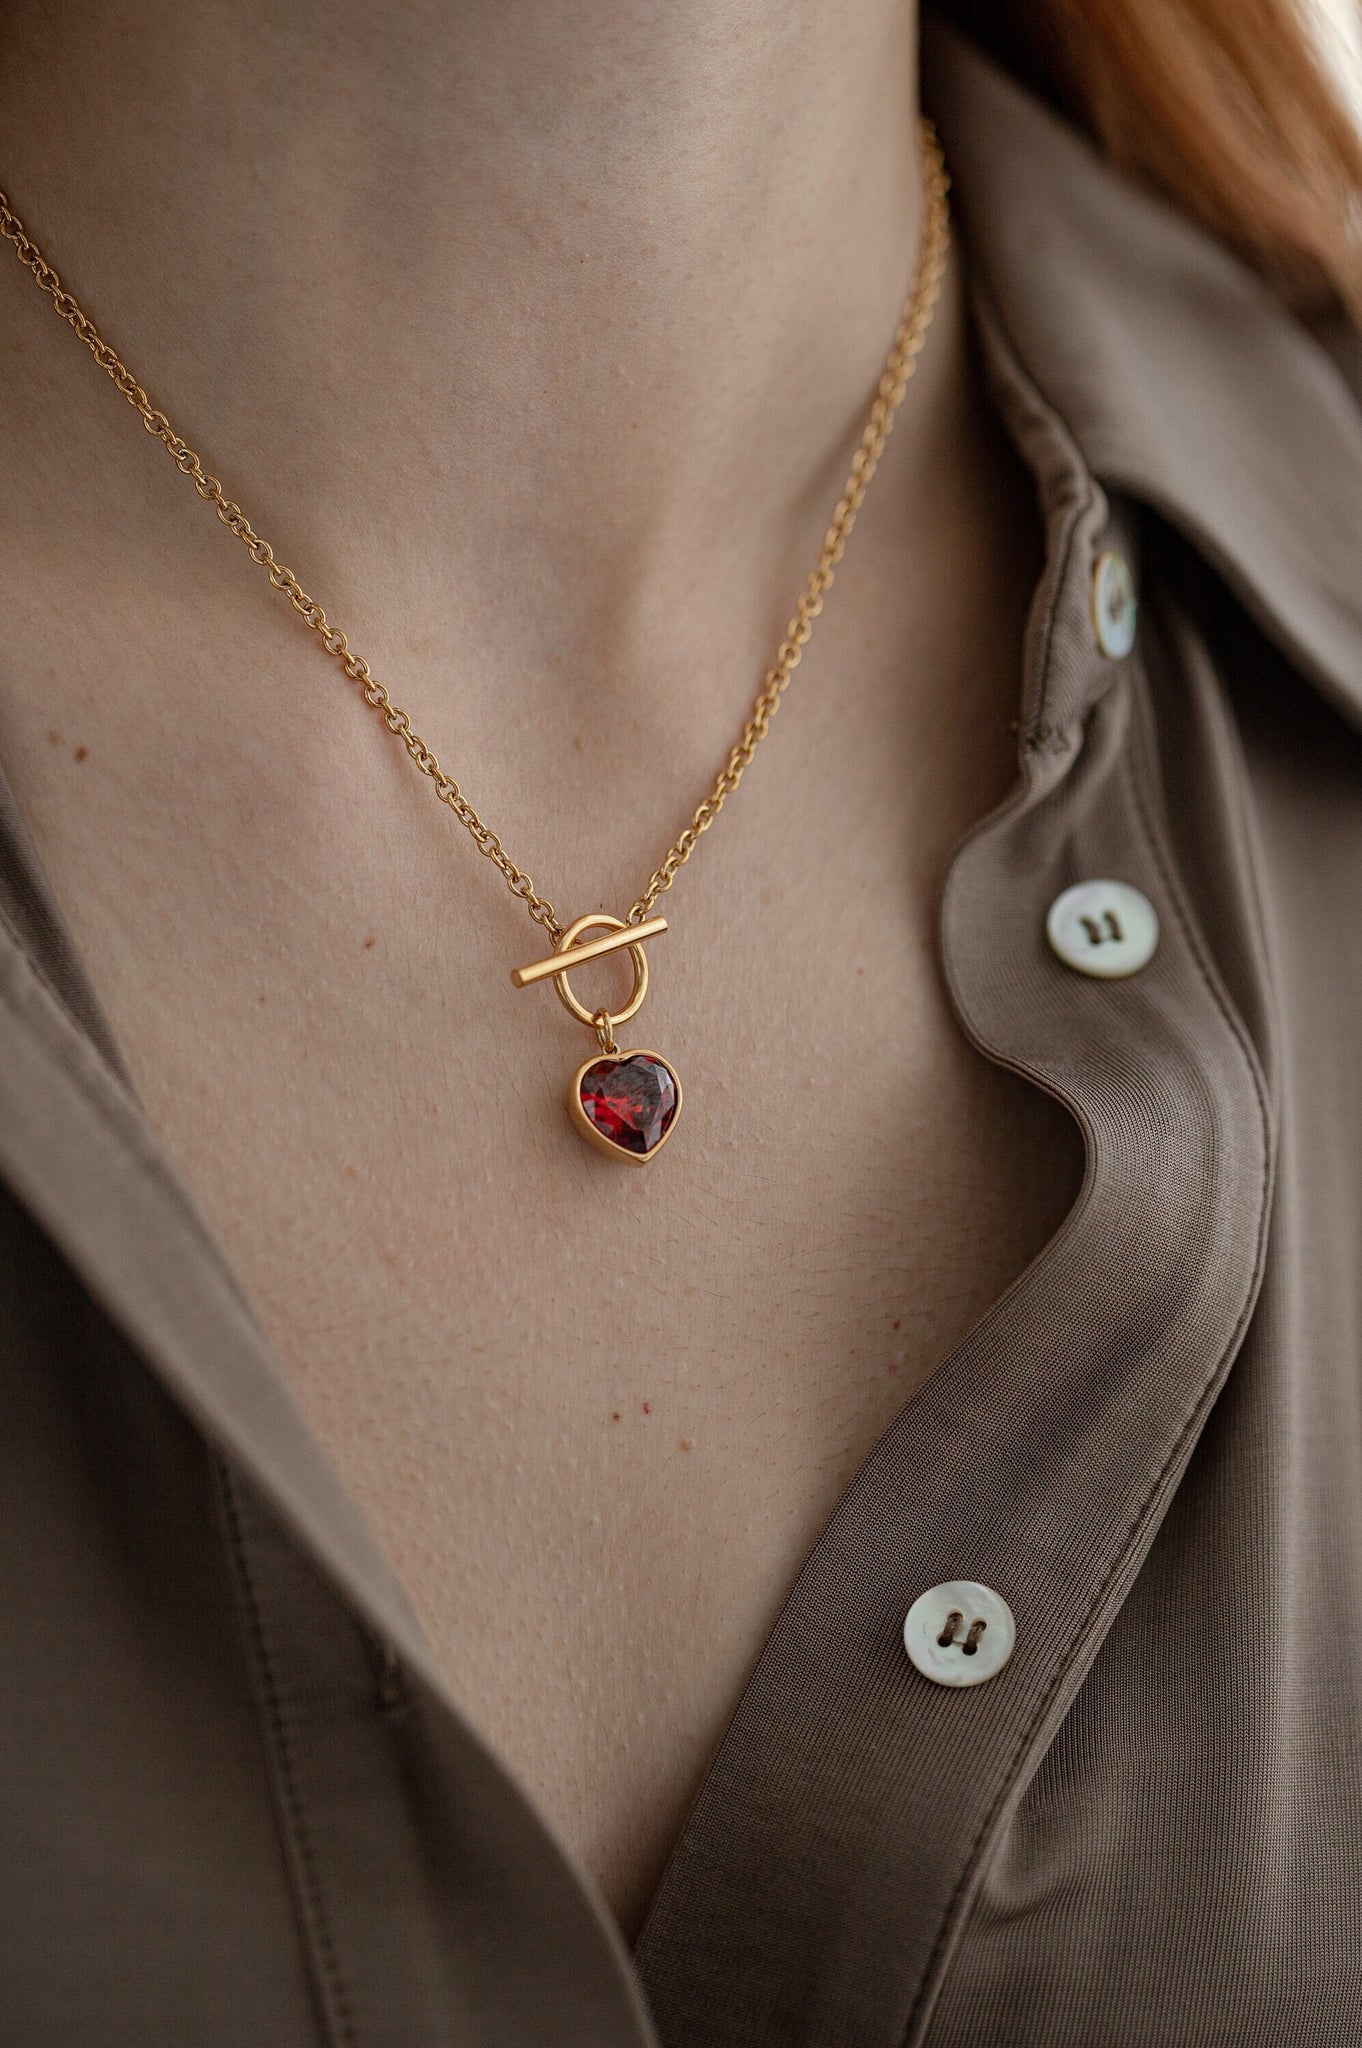 Zirconia Heart Necklace, 18K Gold, OT Necklace, Mothers Day Gift, Garnet Stone Necklace, Mother Necklace, Dainty Necklace, Gift For Mom